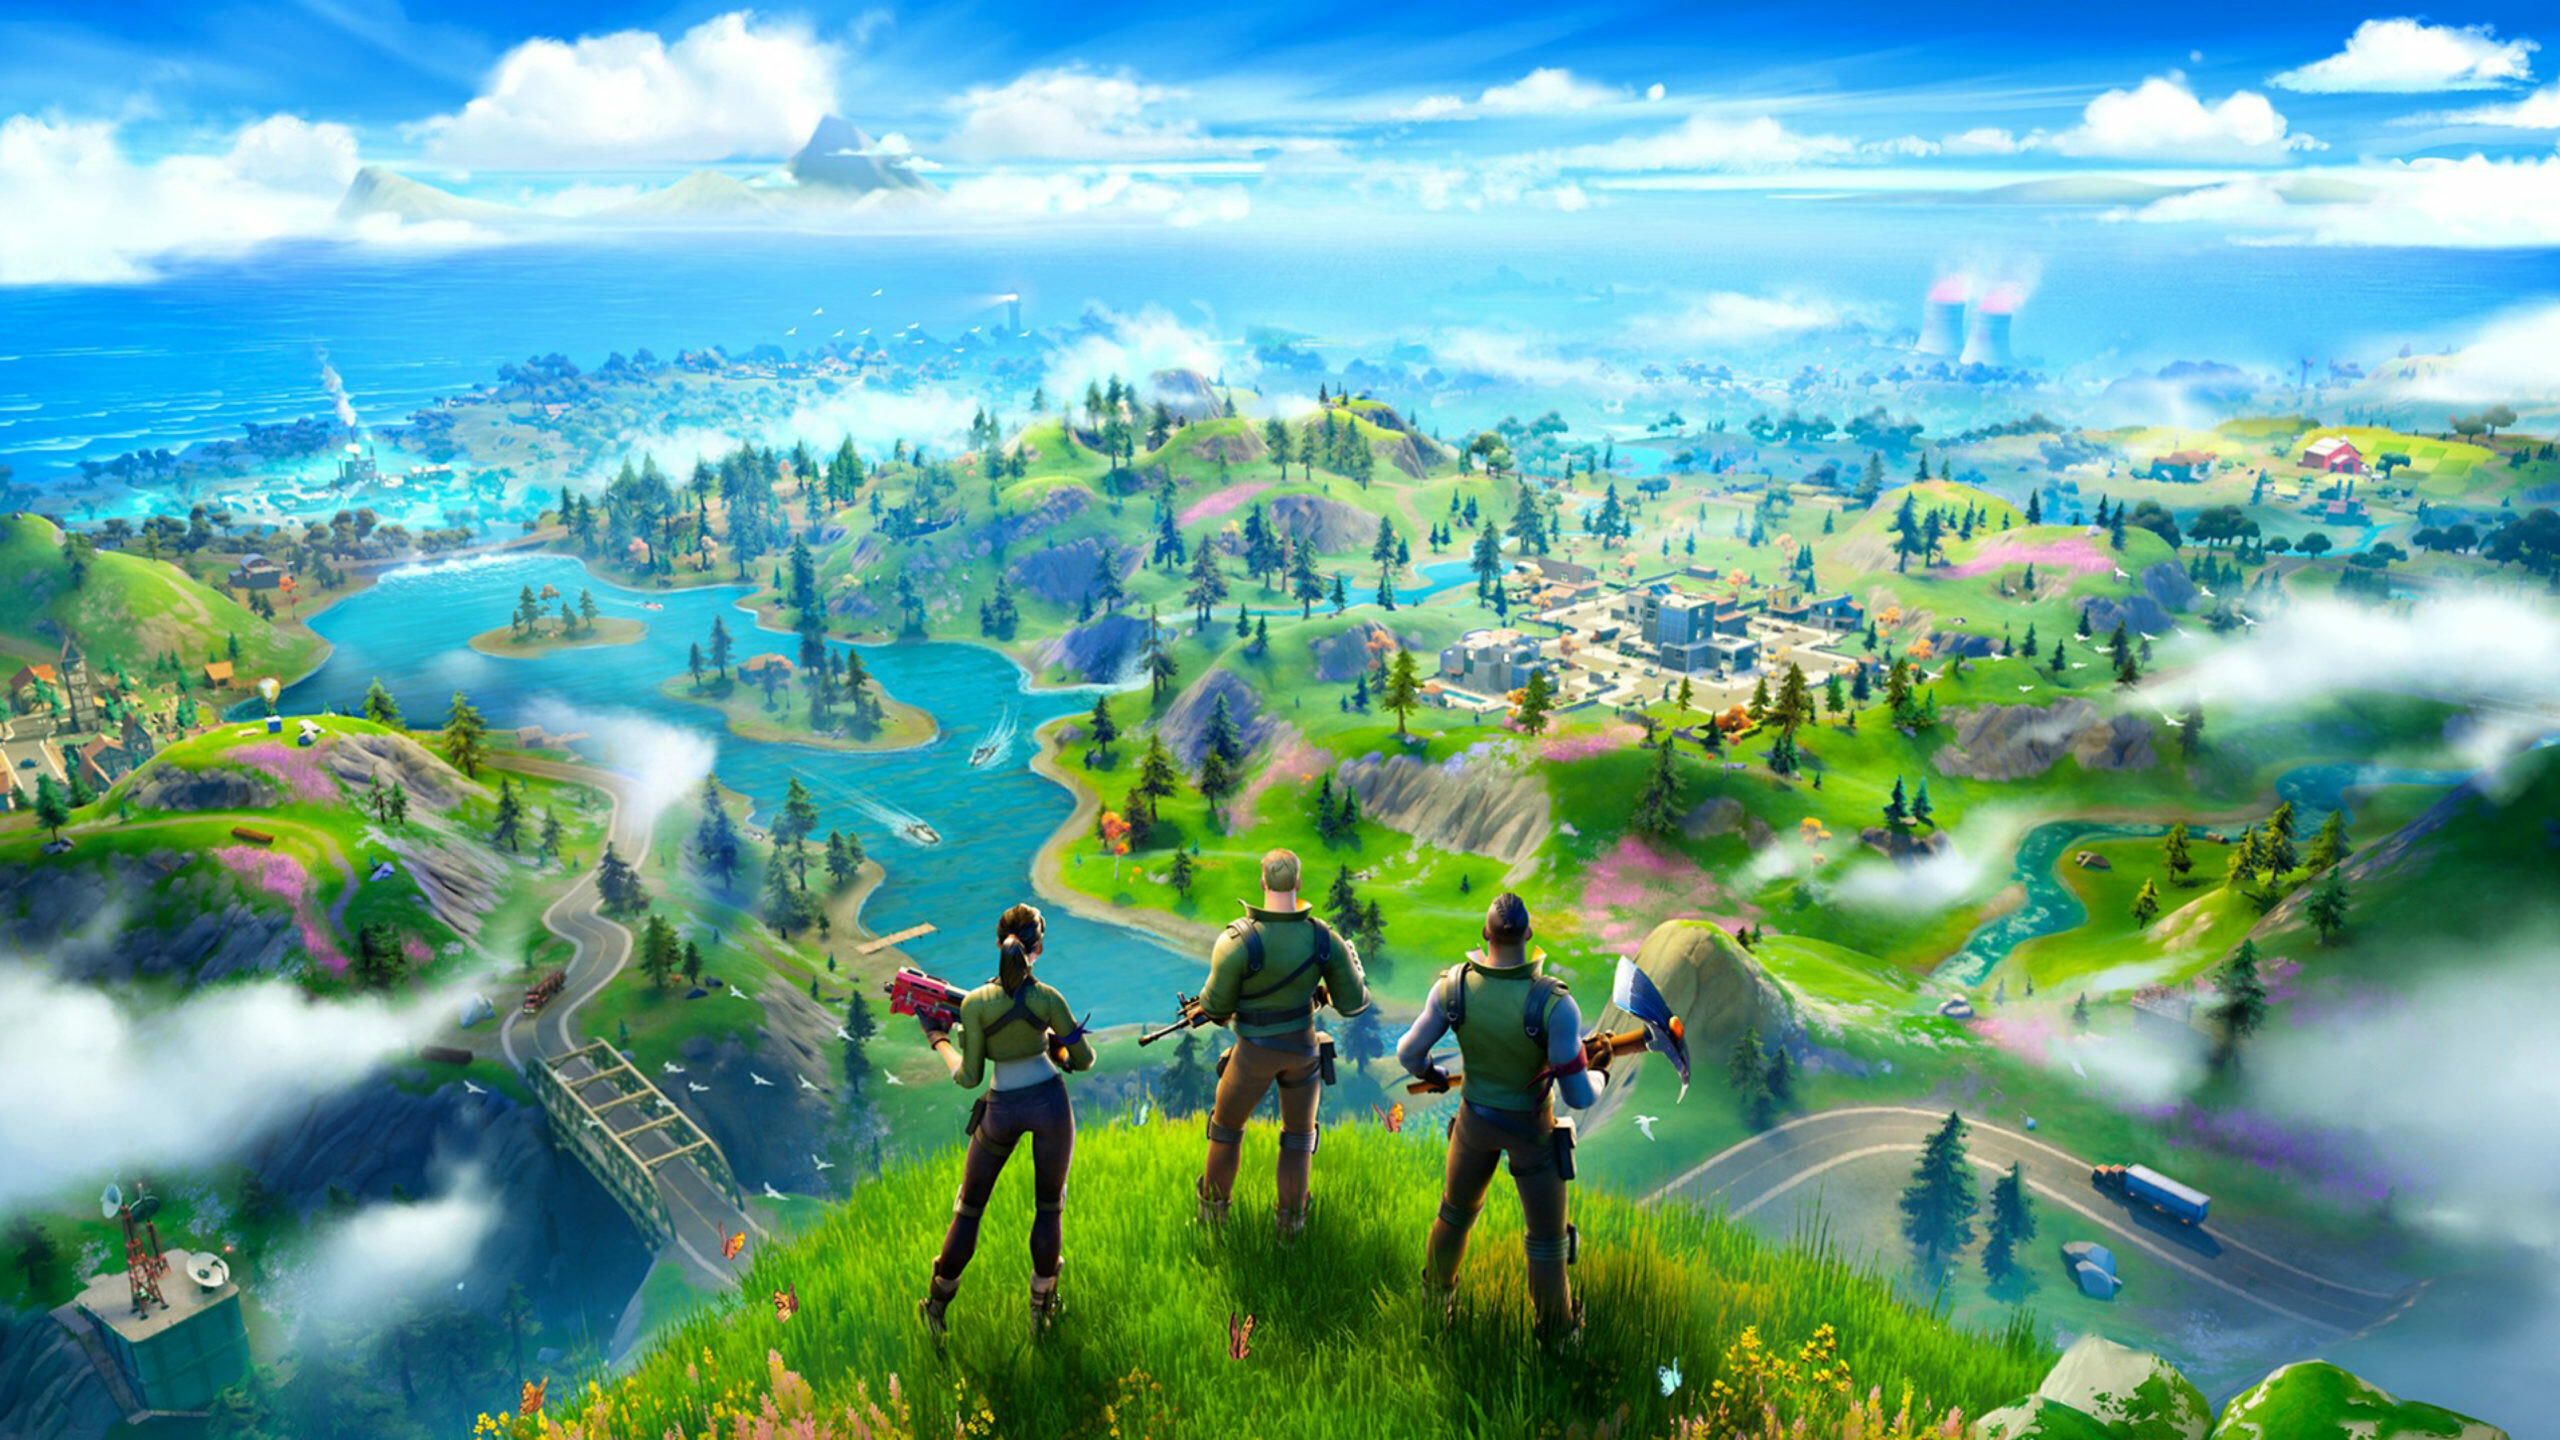 Fortnite: A video game, First released in 2017 by Epic Games. 2560x1440 HD Wallpaper.